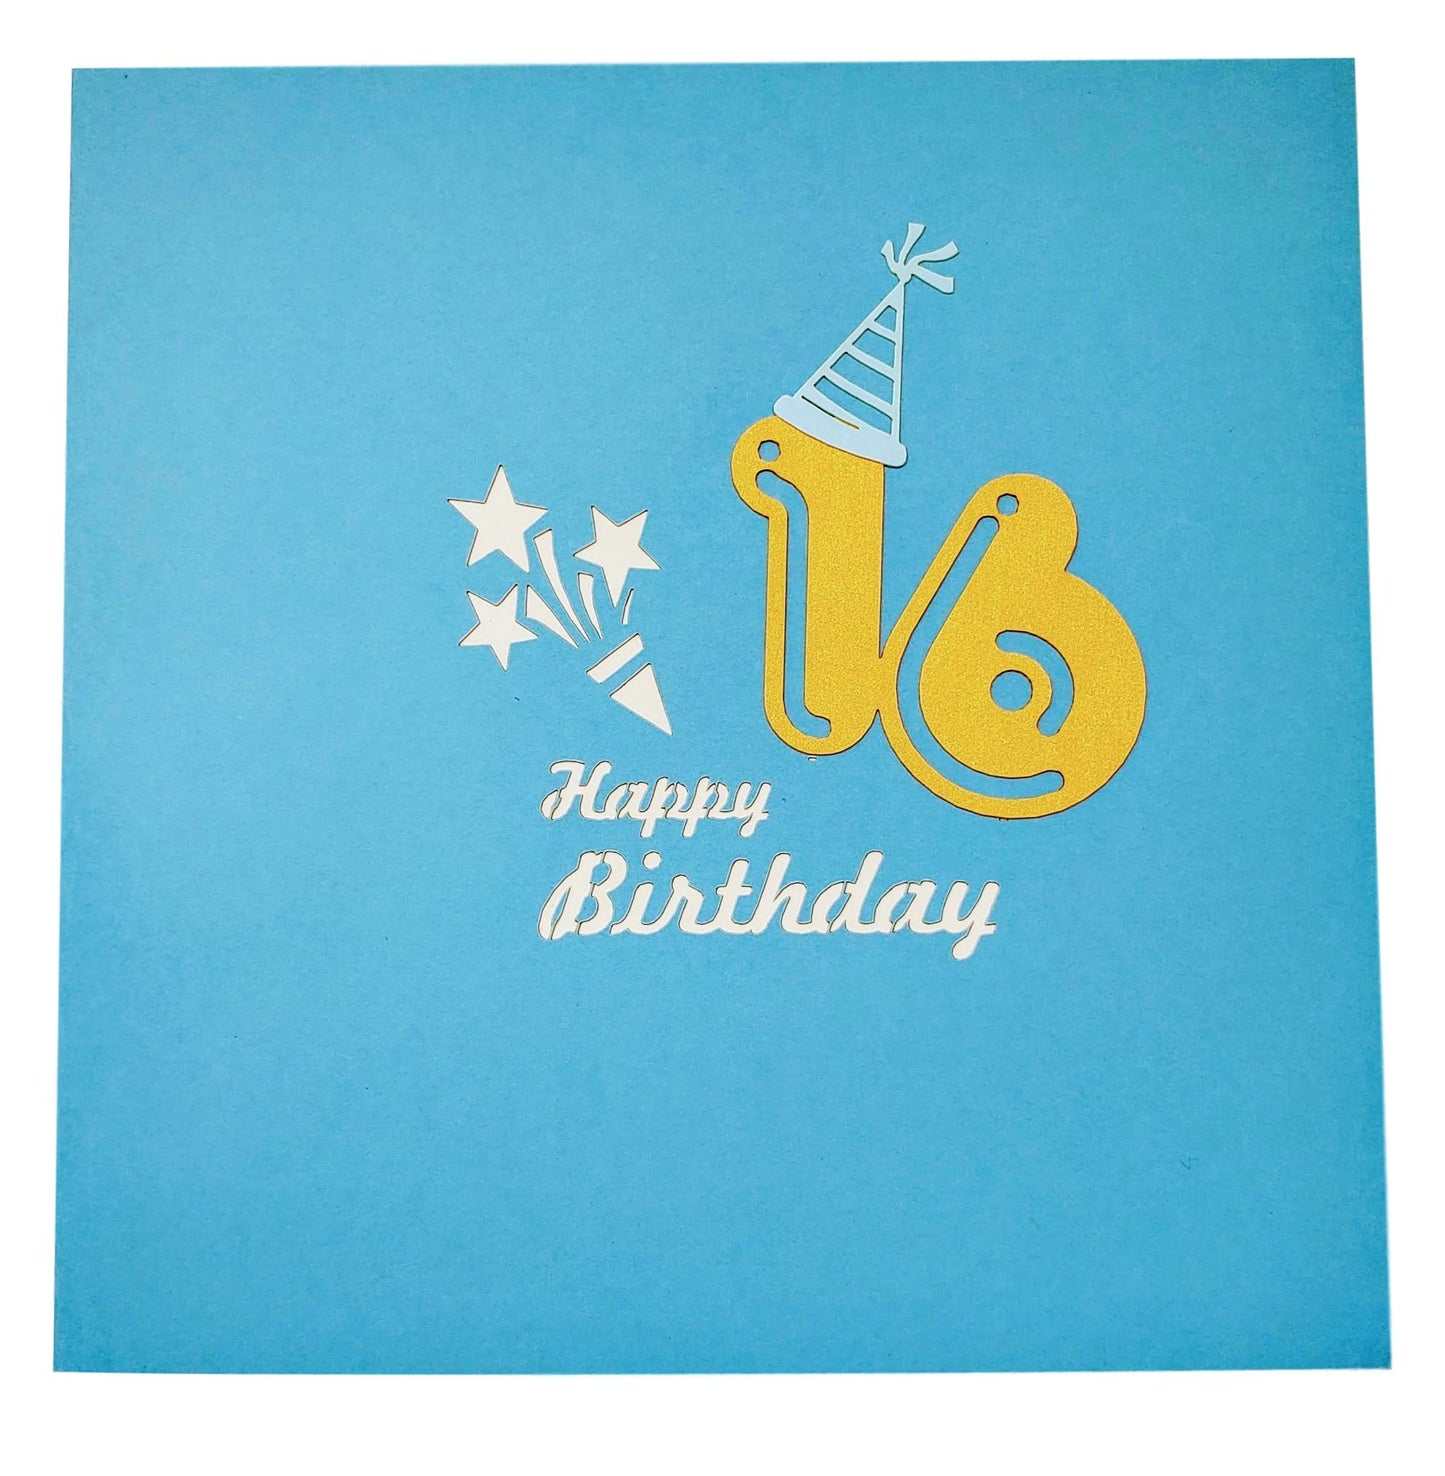 Happy 16th Birthday Blue Party Box 3D Pop Up Greeting Card - Awesome - Balloons - Birthday - Celebra - iGifts And Cards